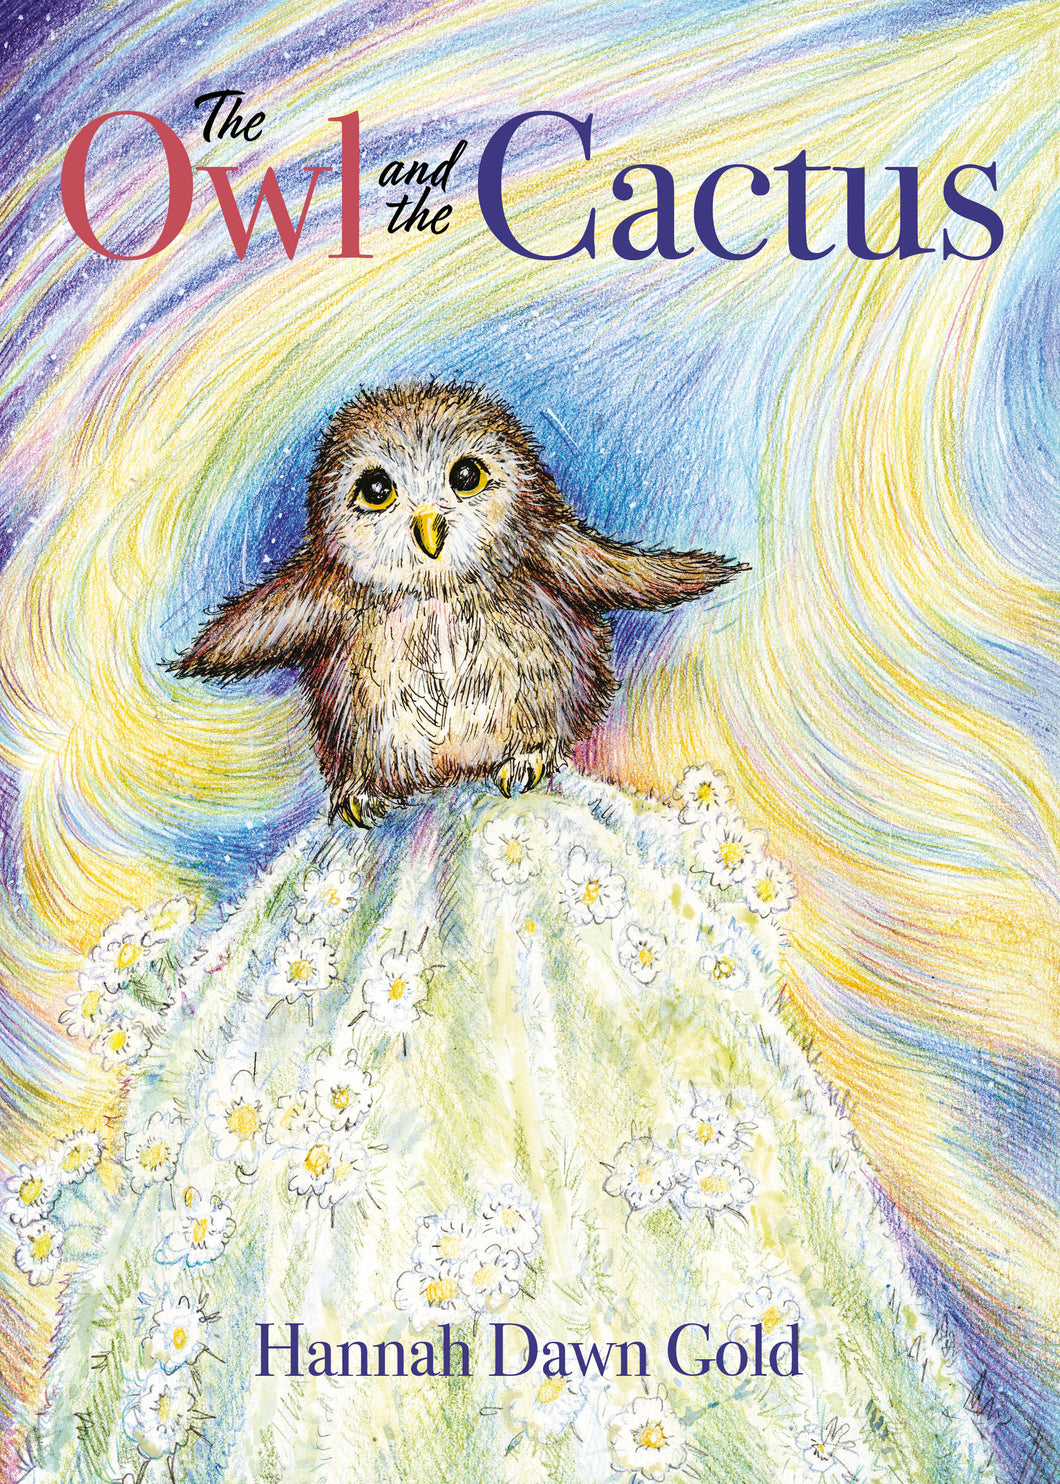 The Owl and the Cactus - Hannah Dawn Gold